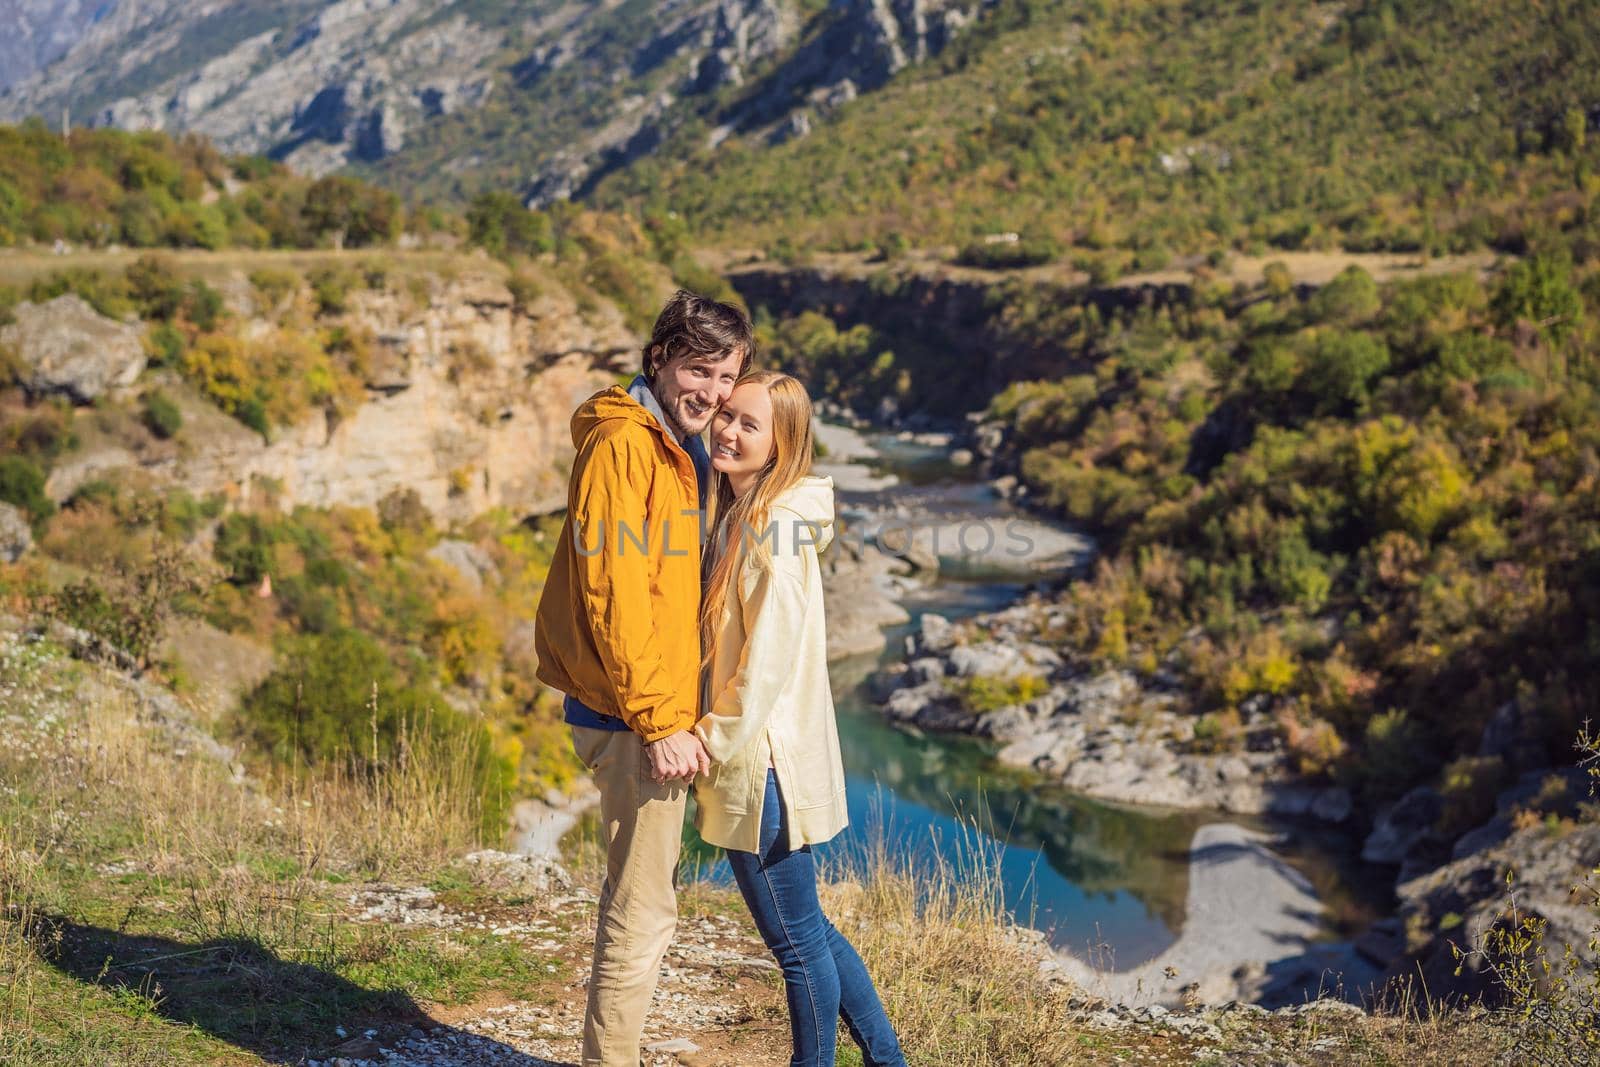 Montenegro. Happy couple man and woman tourists on the background of Clean clear turquoise water of river Moraca in green moraca canyon nature landscape. Travel around Montenegro concept.